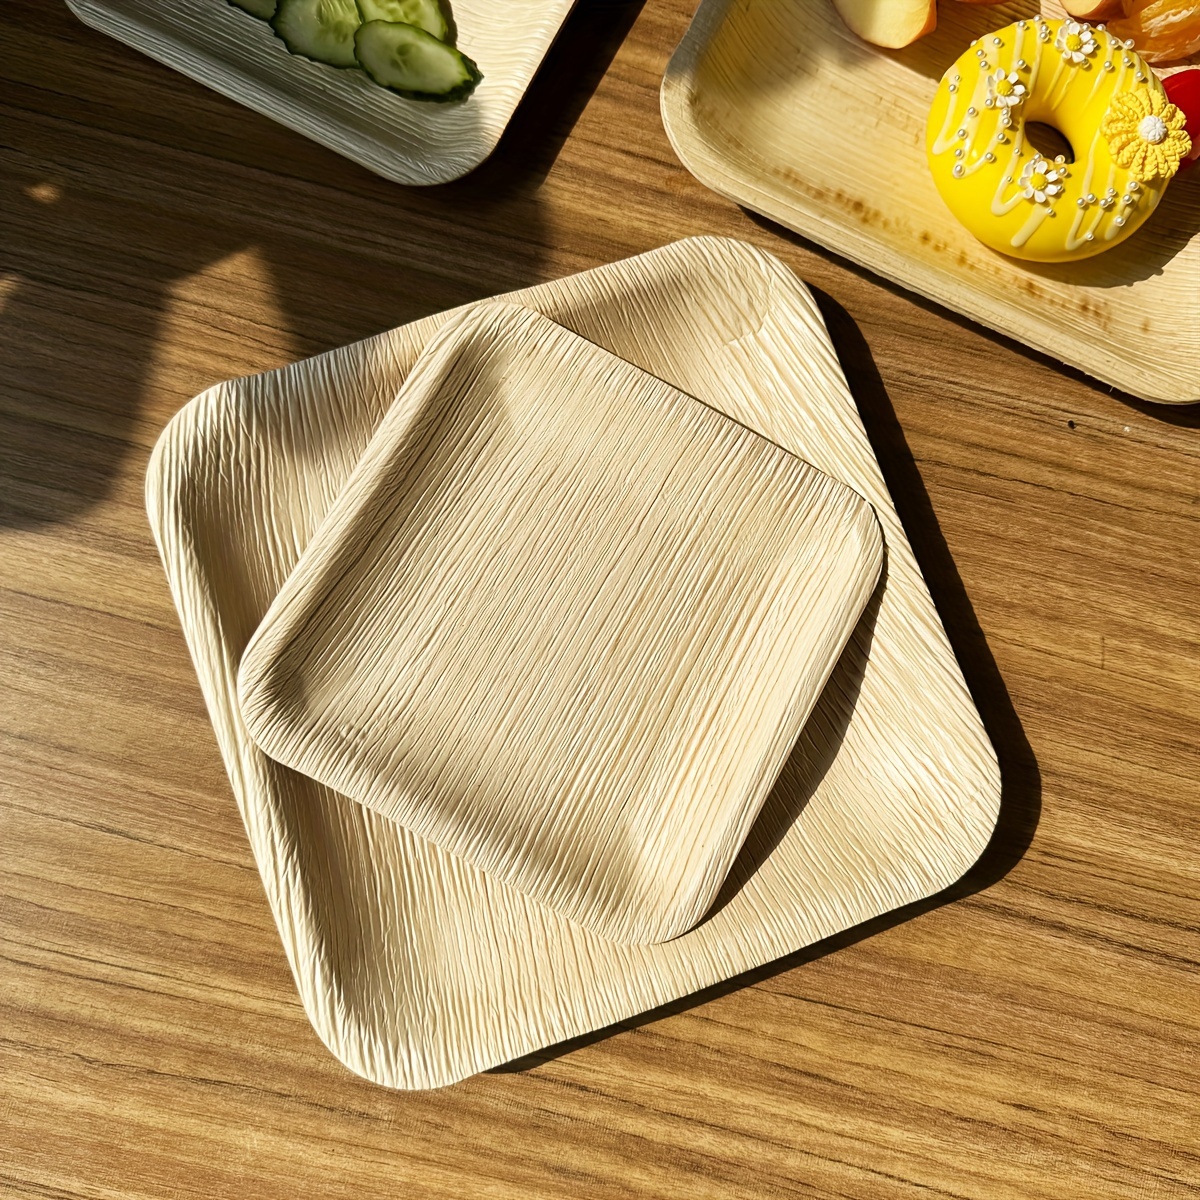 

48pcs Bamboo Plates, Disposable Square Palm Leaf Plates Dinner Plates, Dessert Plates, Suitable For Home Dinner Camping Picnic Party, Tableware Accessories, Party Supplies